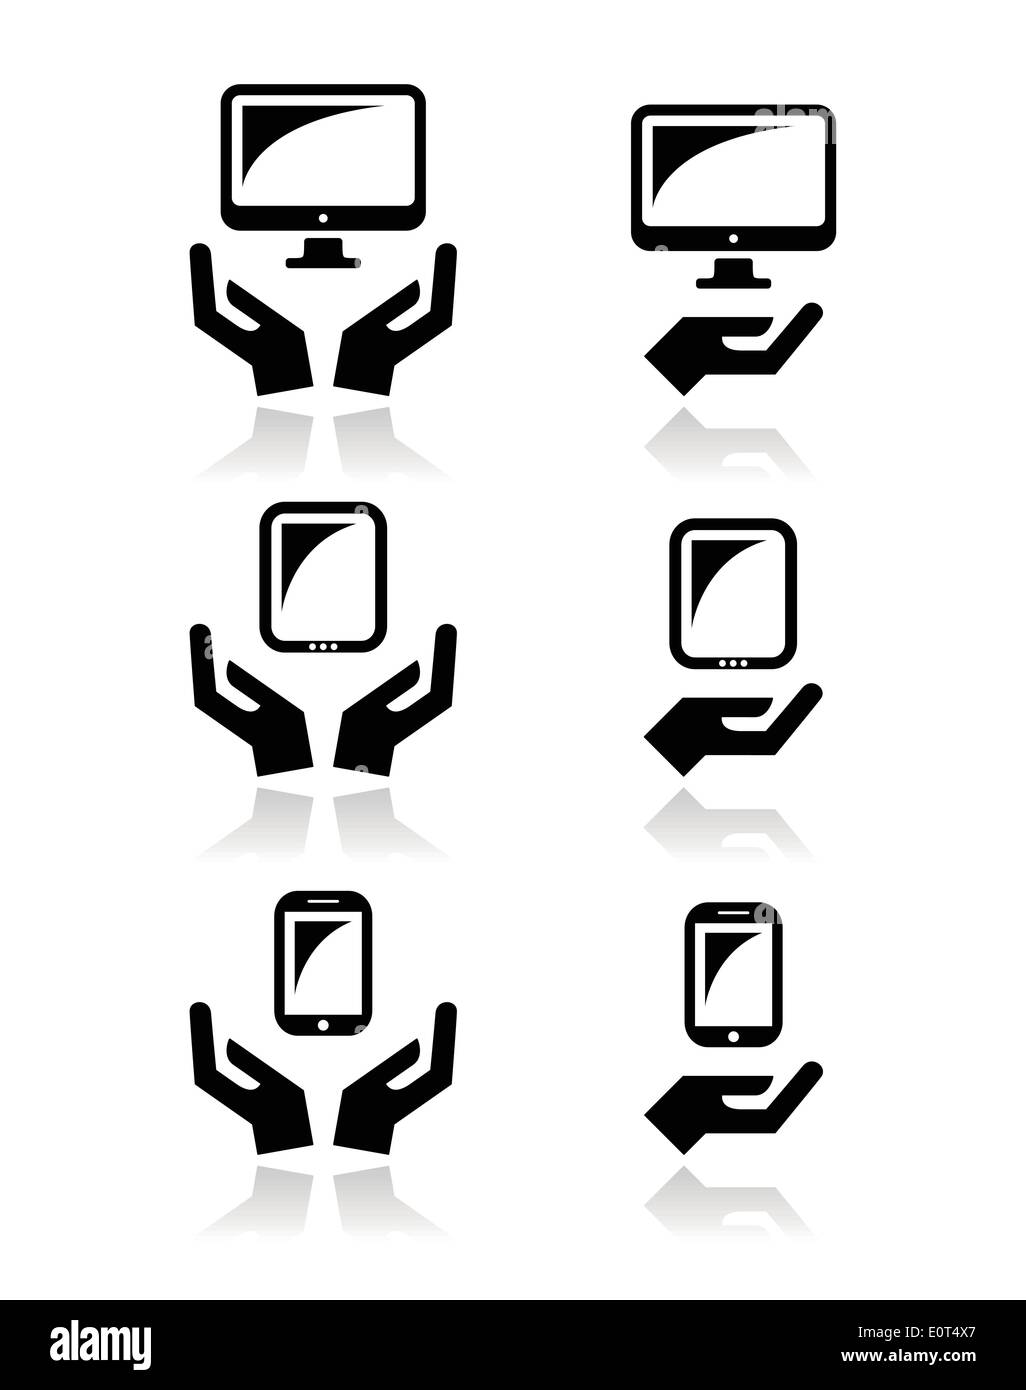 Hands with computer, tablet, mobile or cell phone icons Stock Vector